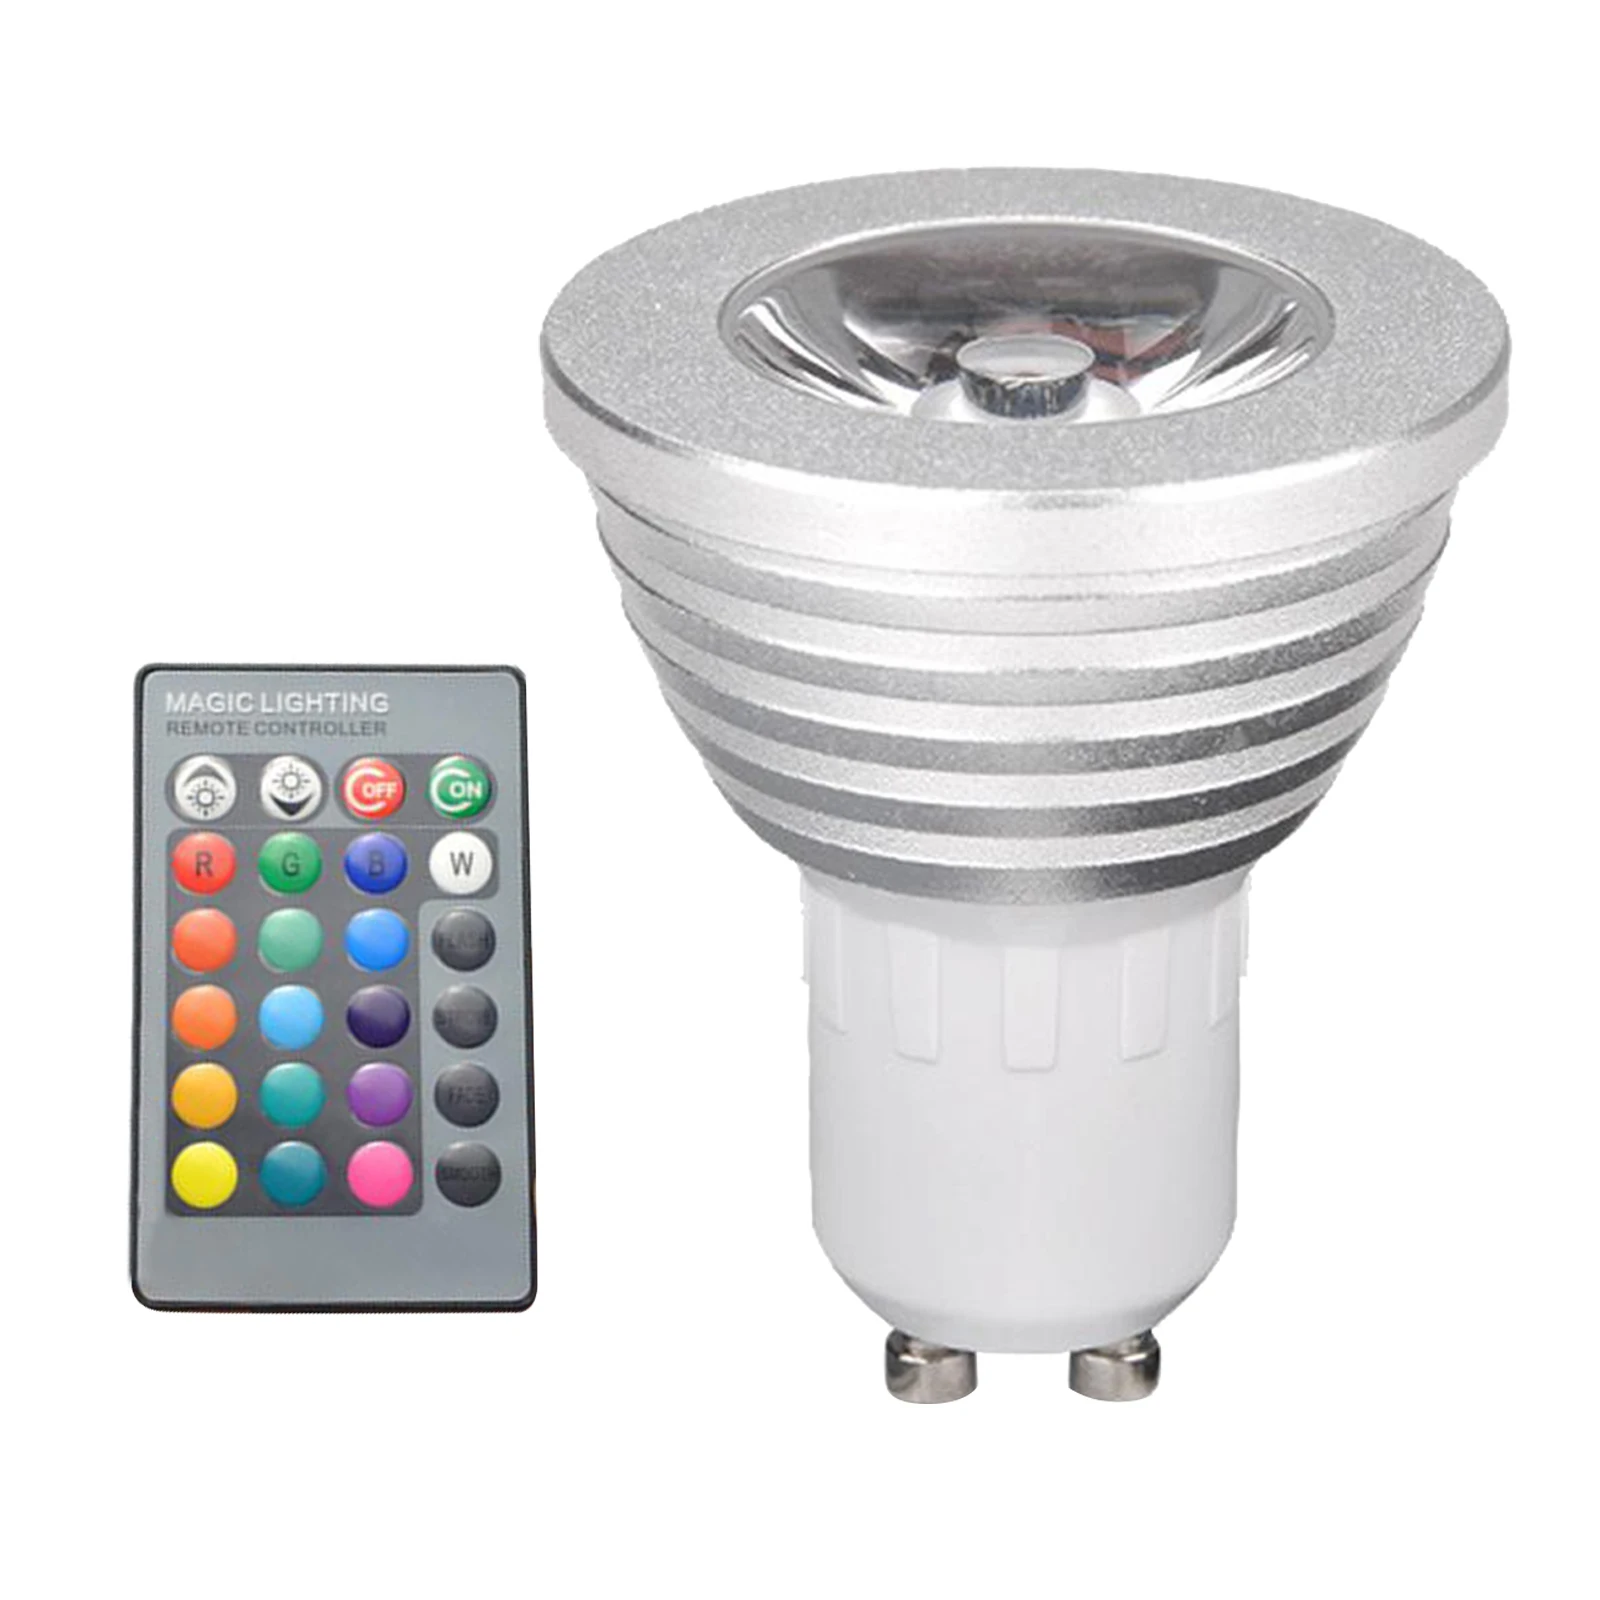 GU10 LED Light Bulb 3 Watt Color Changing RGB Dimmable LED Light Bulbs with Remote Control